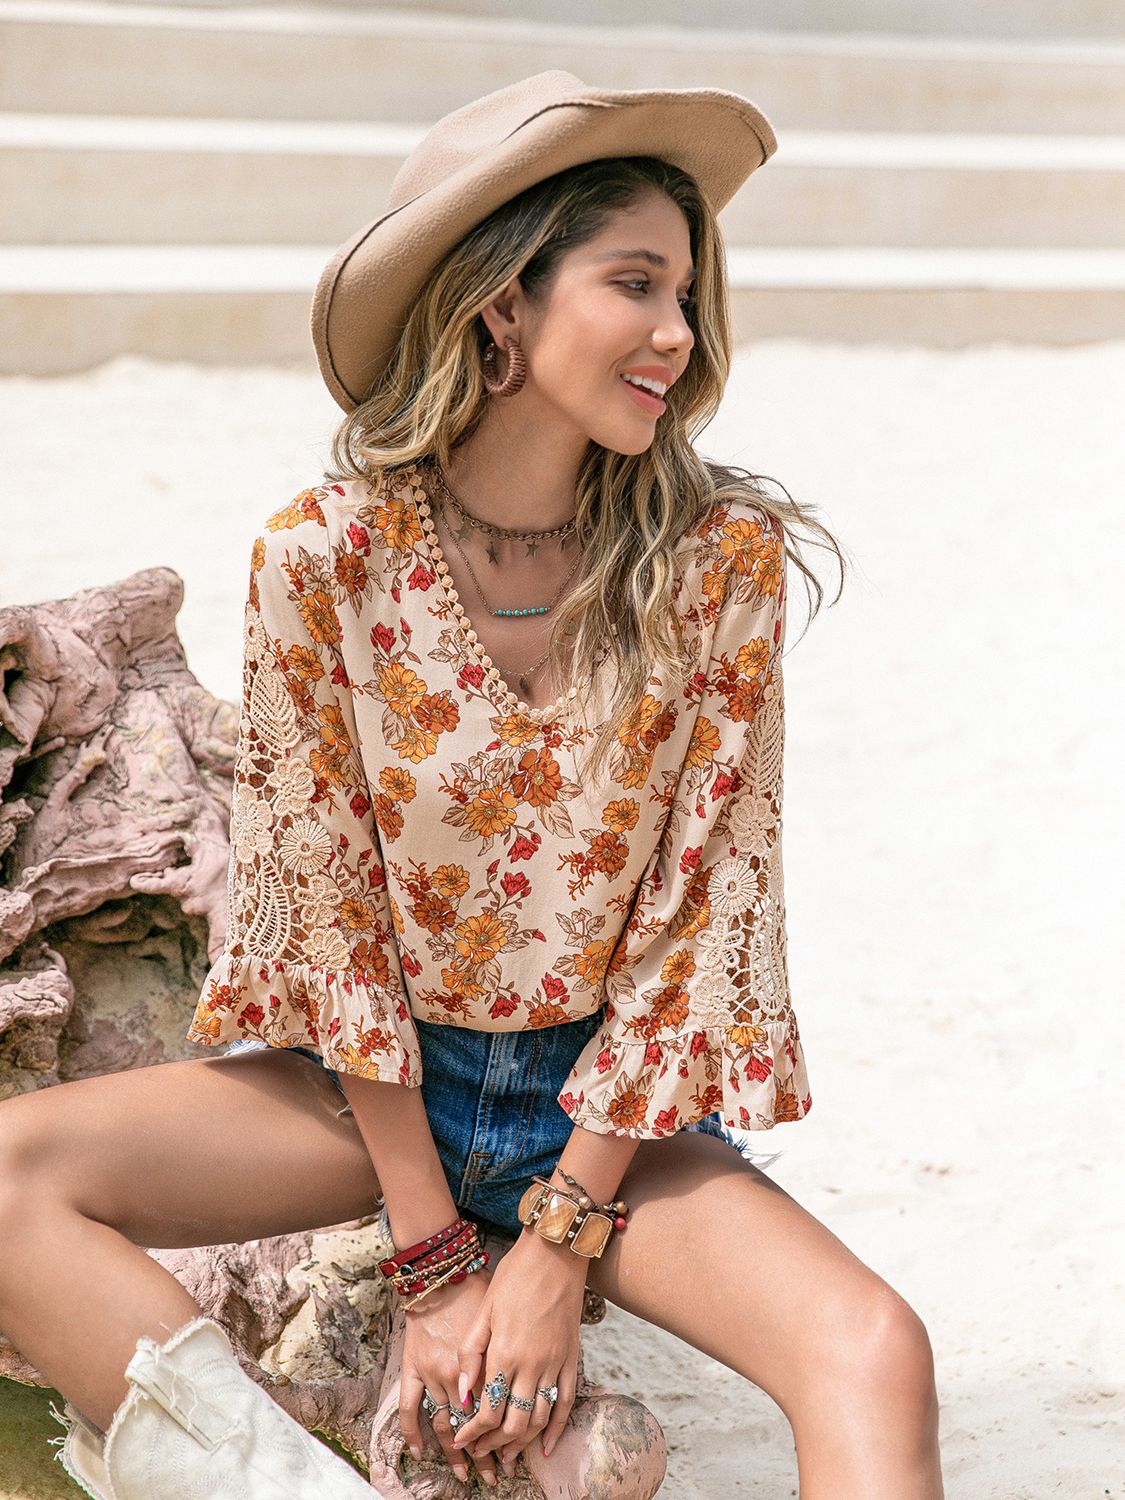 Fall Floral Blouse - ONLINE EXCLUSIVE